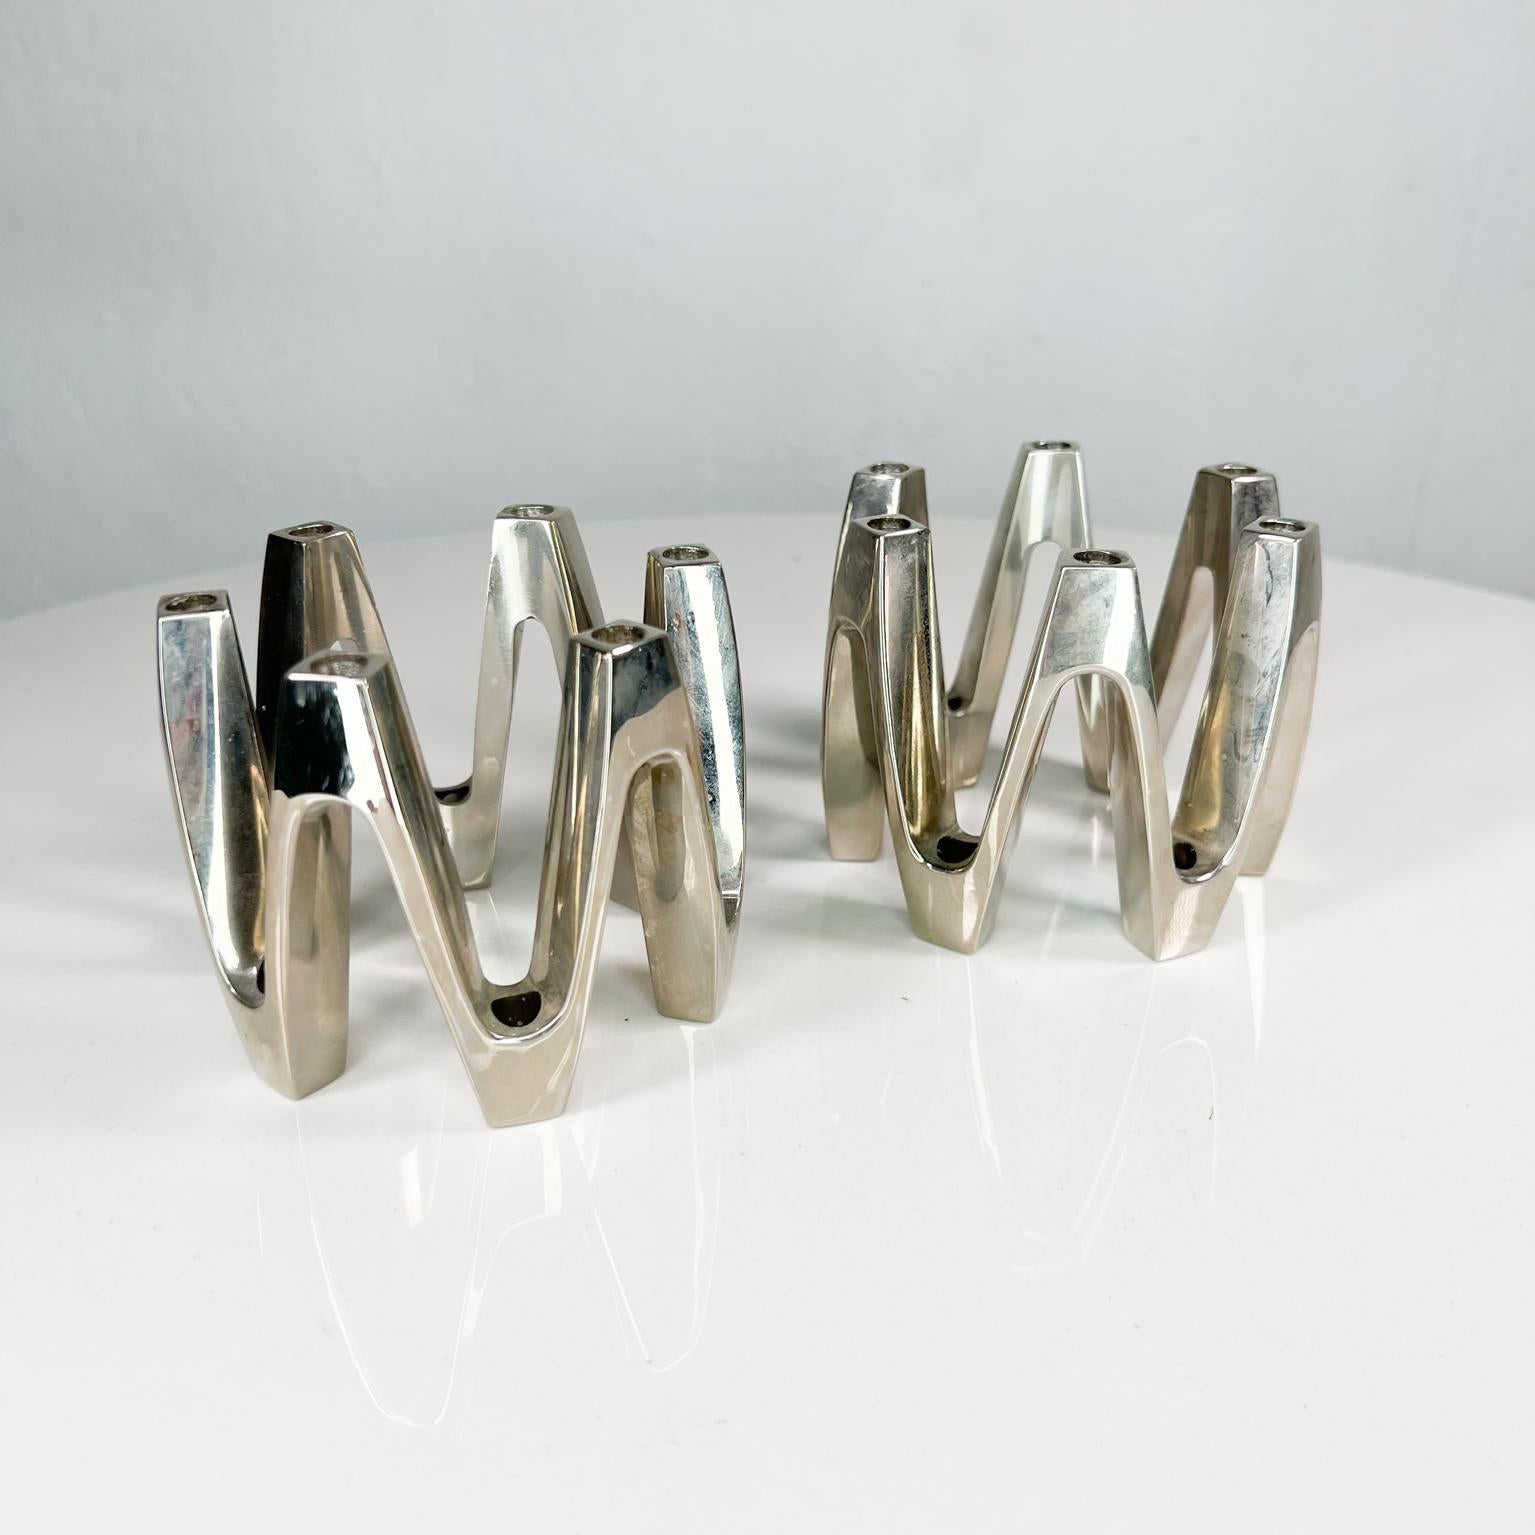 Mid-20th Century 1960s Modernist Crown Silver Candle Holders by Jens Quistgaard Dansk Design